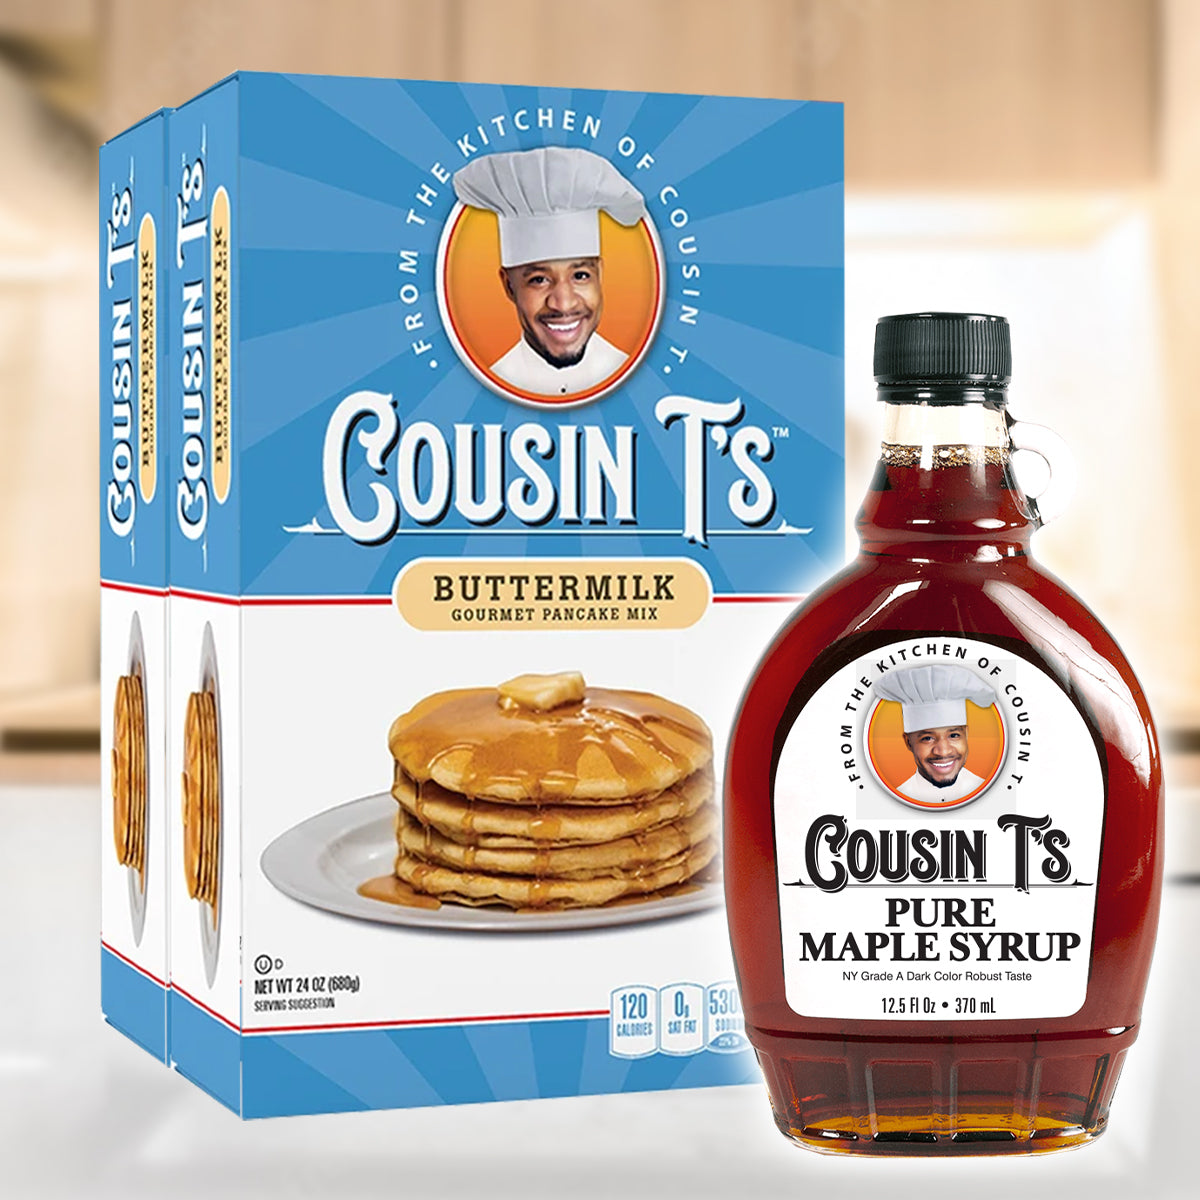 Cousin T's Maple Syrup & 2 Pack Pancake Mix Bundle